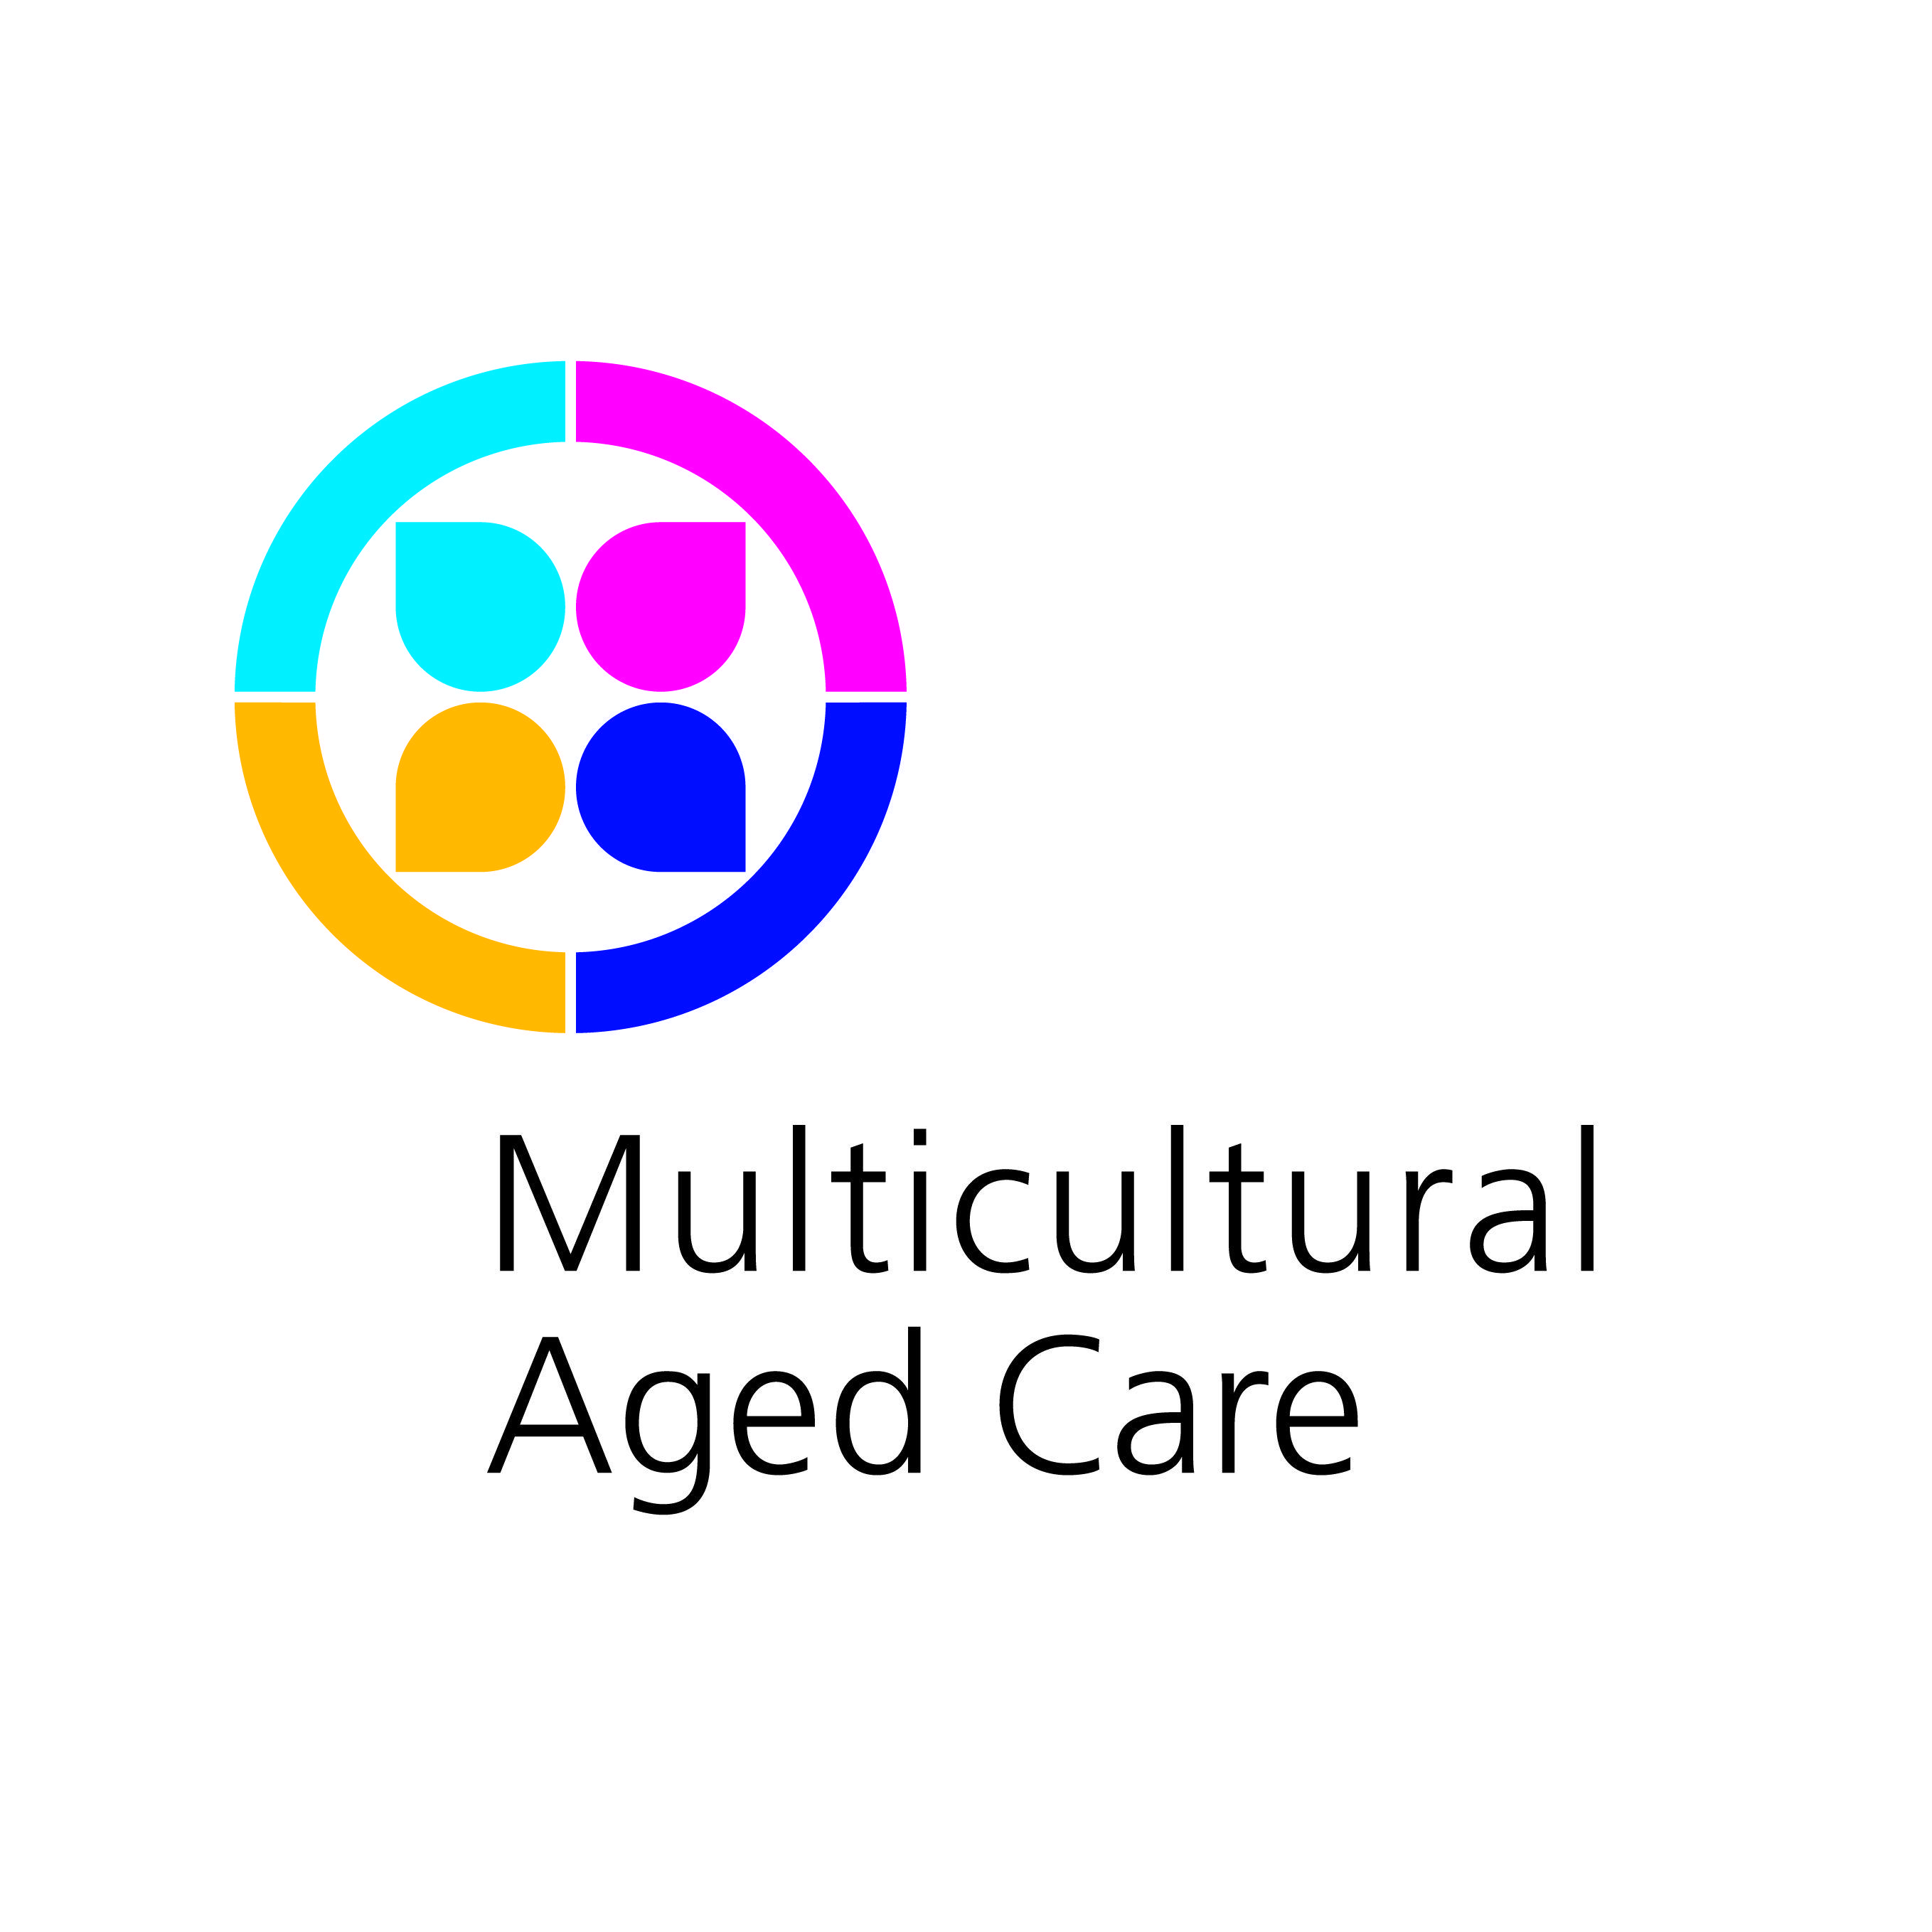 Aged Logo - Multicultural Aged Care. Respecting Diversity in Ageing